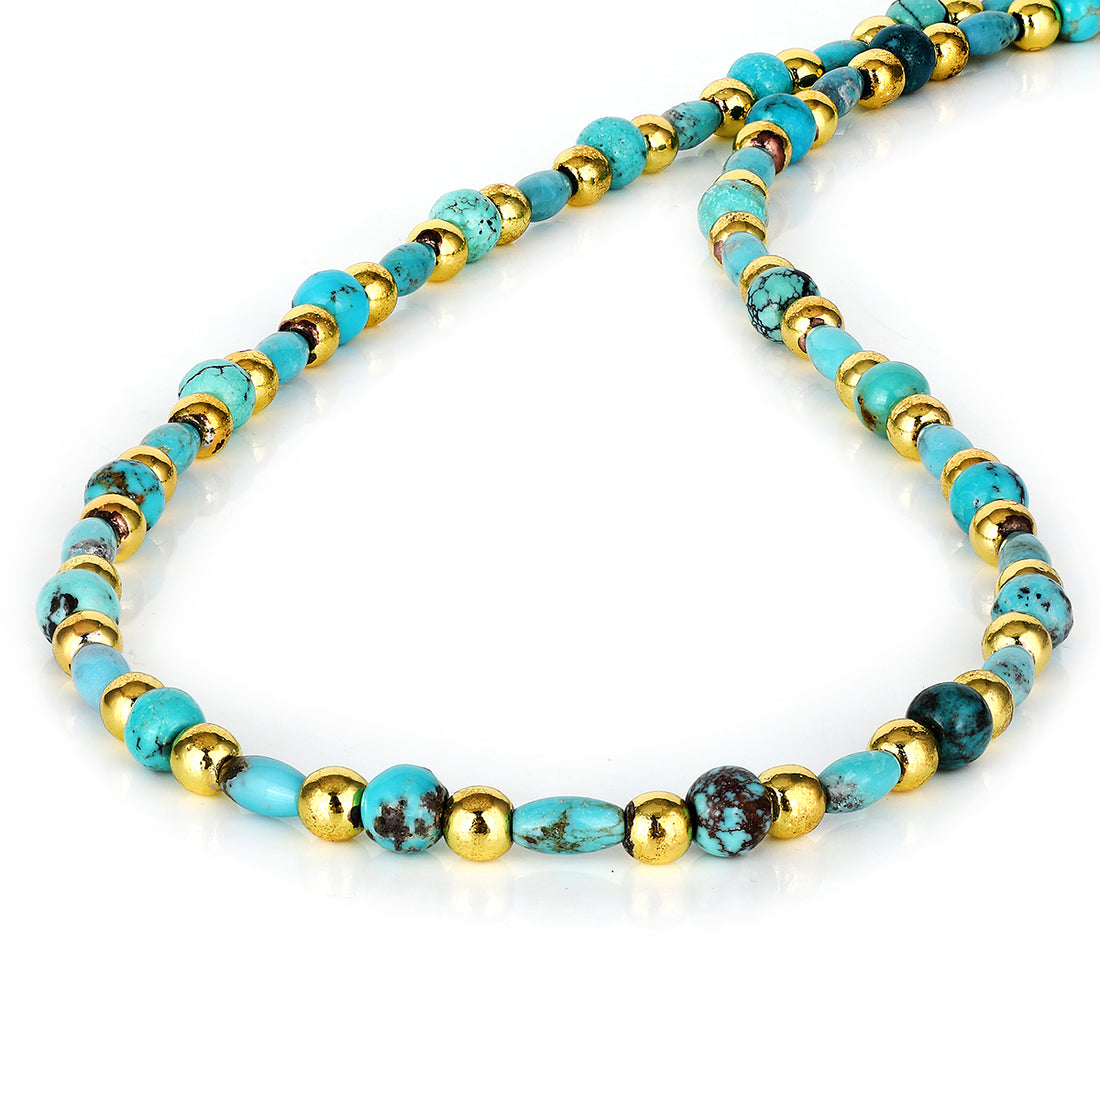 Turquoise and Hematite Choker Necklace